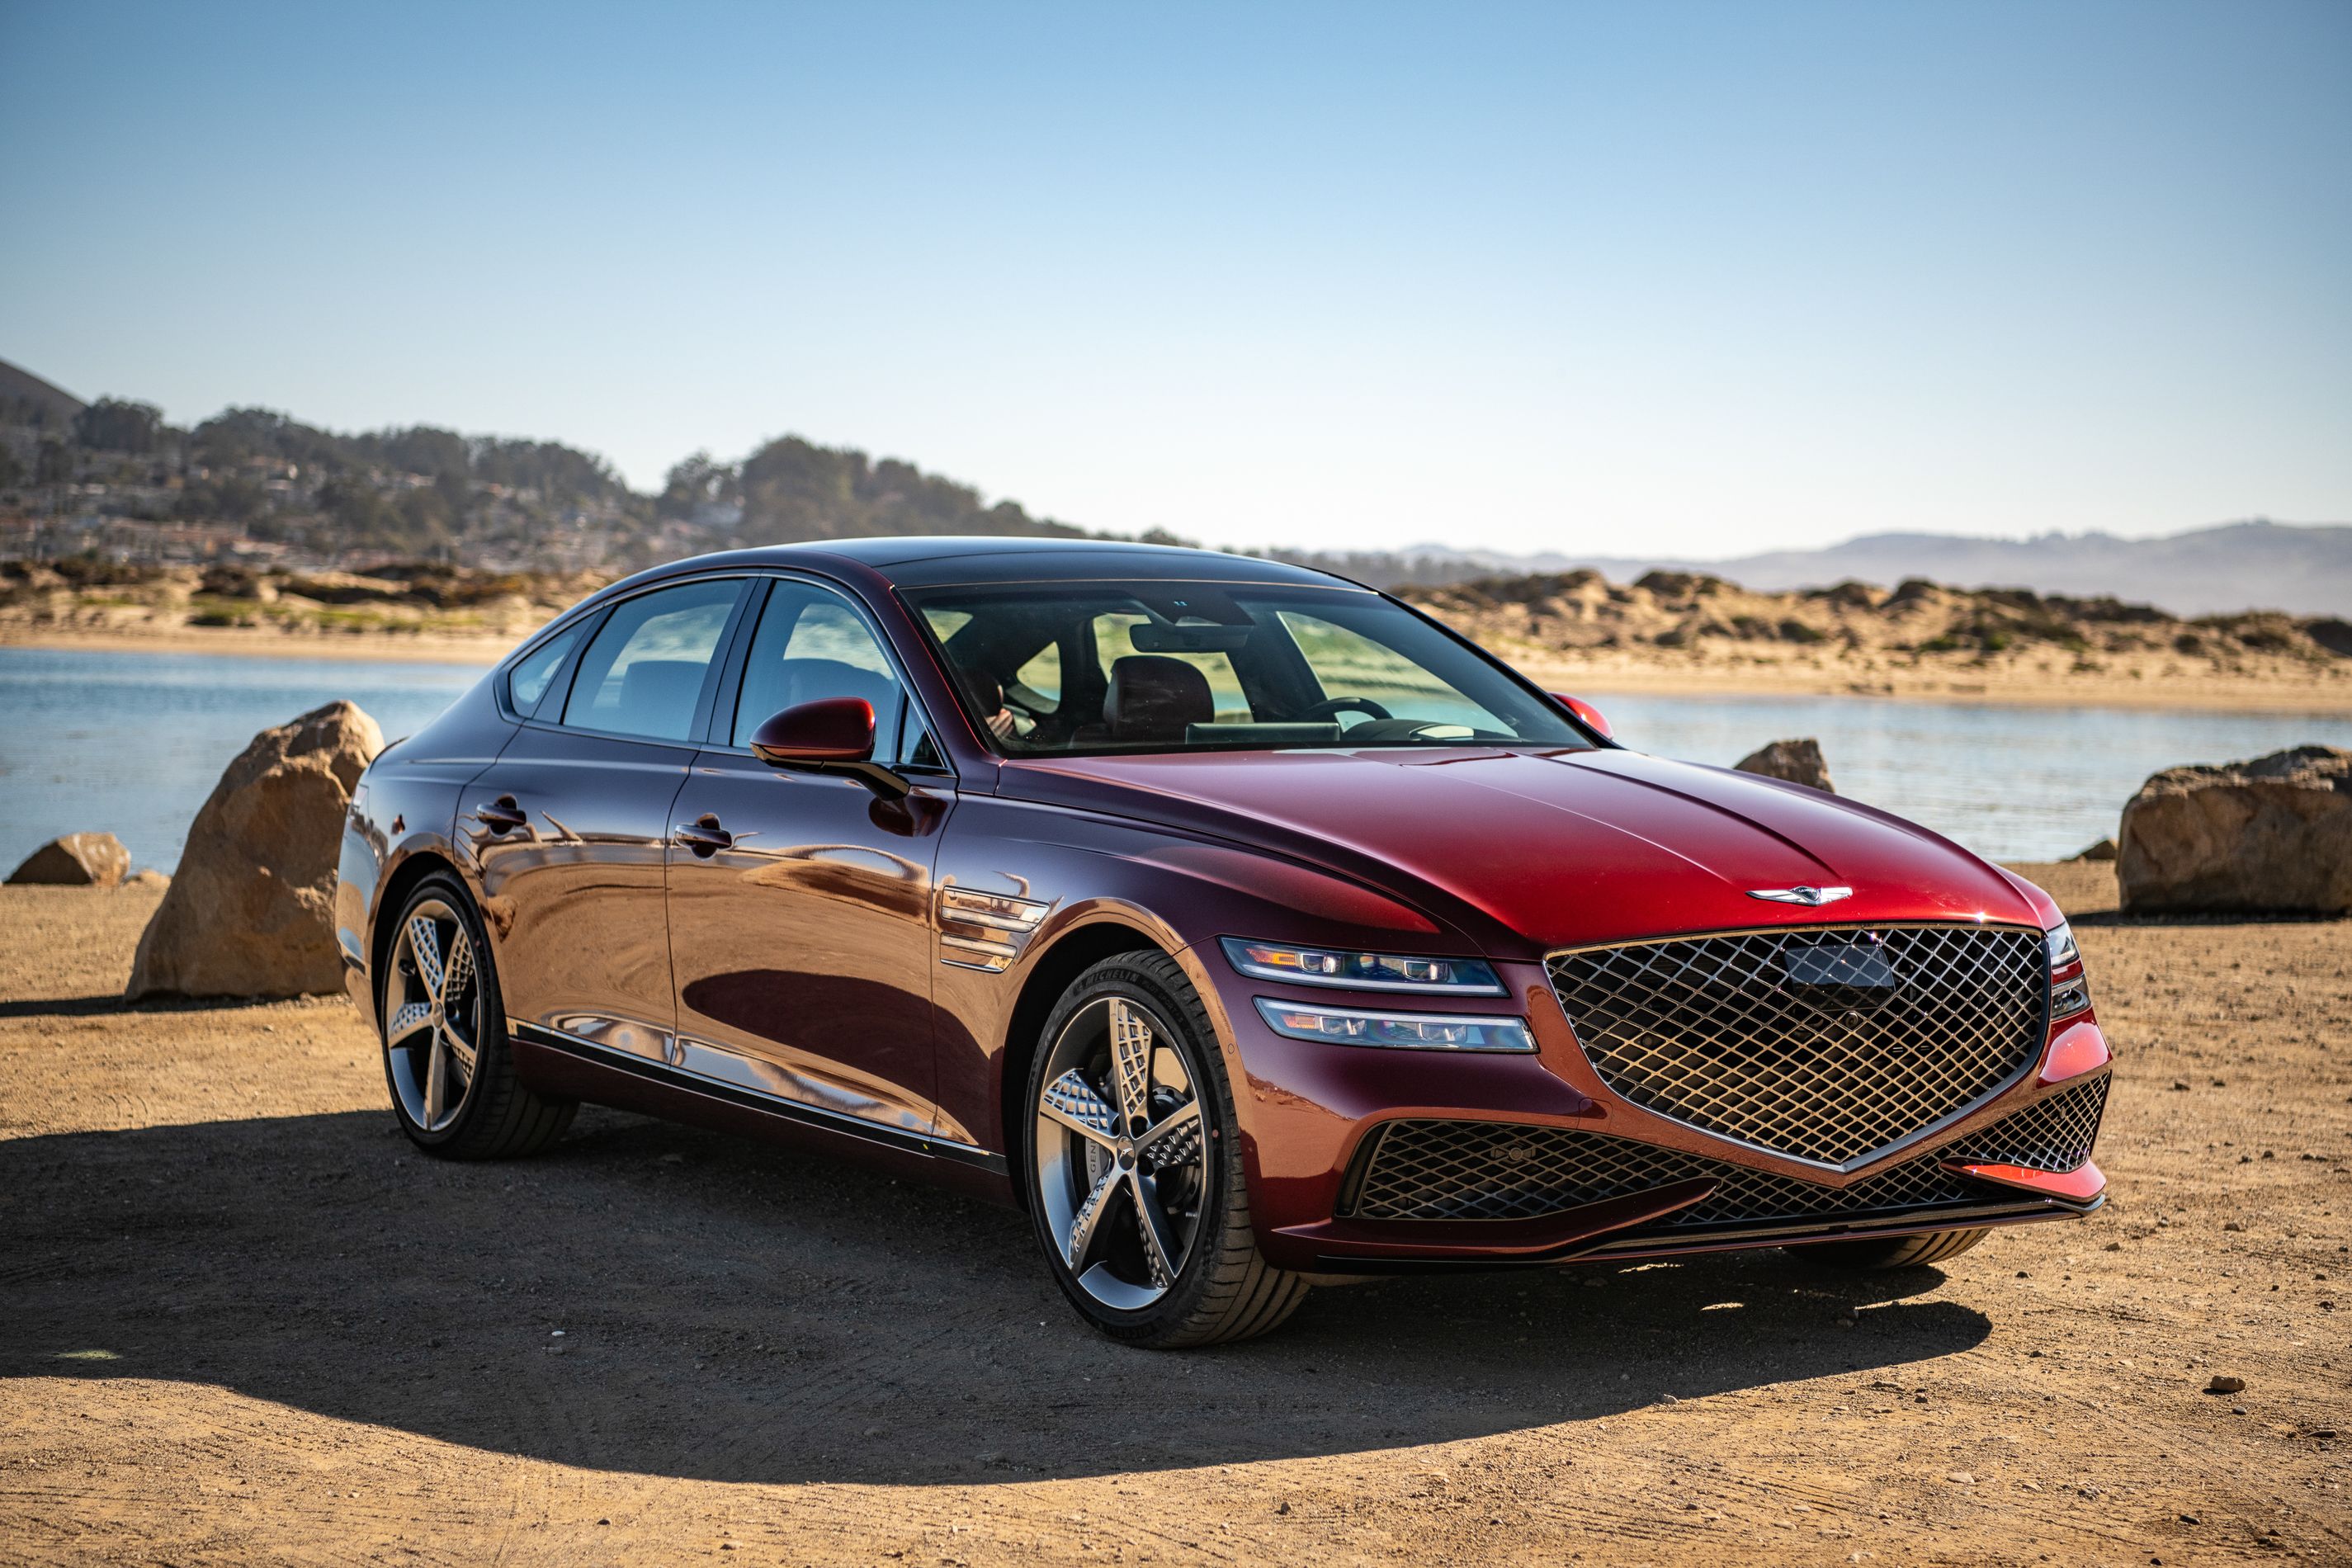 2022-genesis-g80-electric-in-red-front-view-21motoring